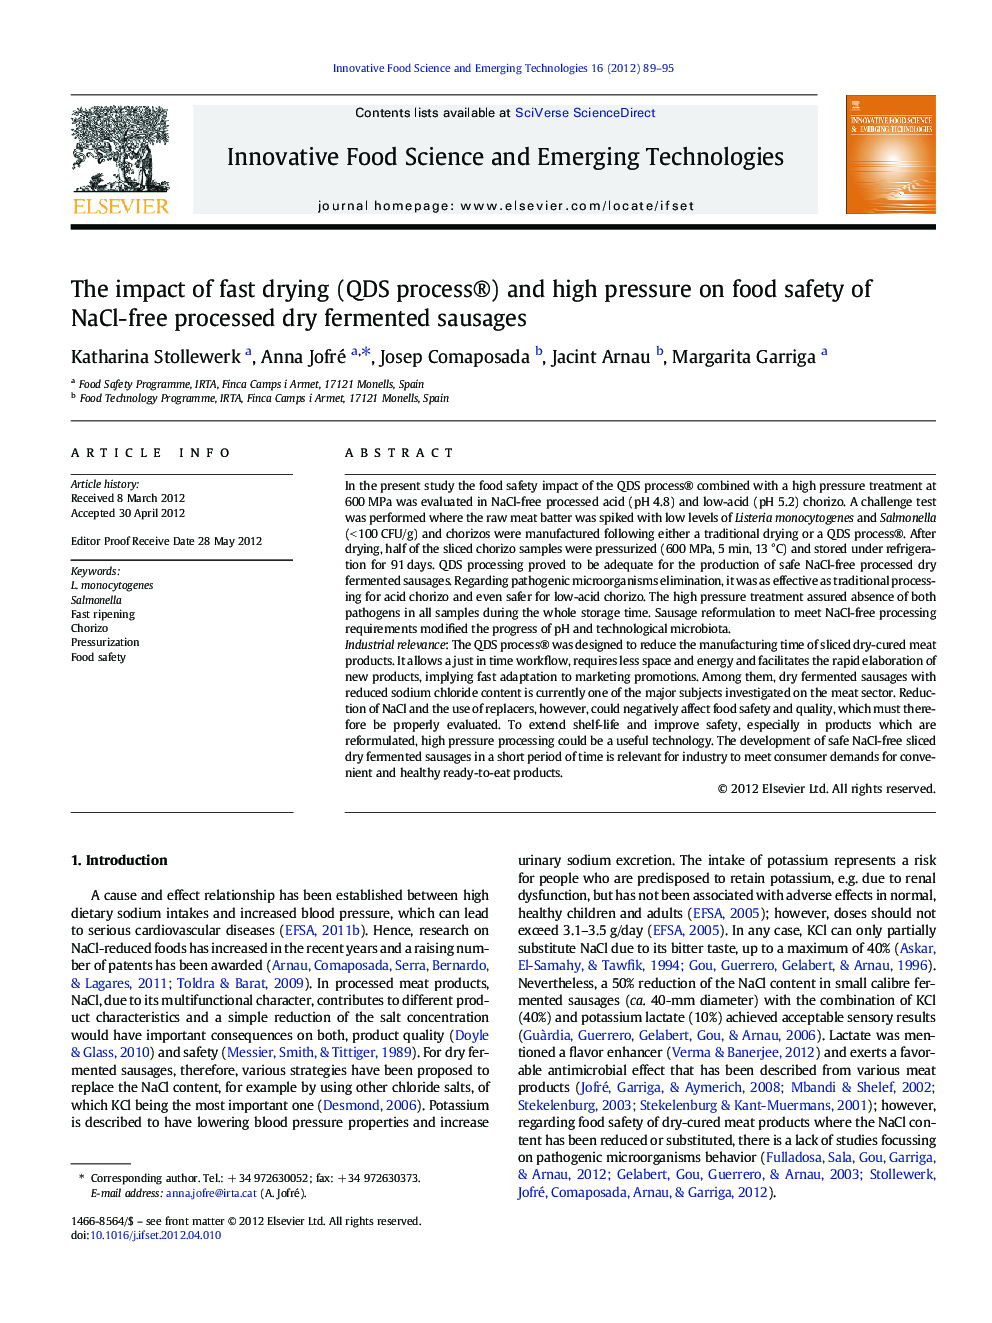 The impact of fast drying (QDS process®) and high pressure on food safety of NaCl-free processed dry fermented sausages